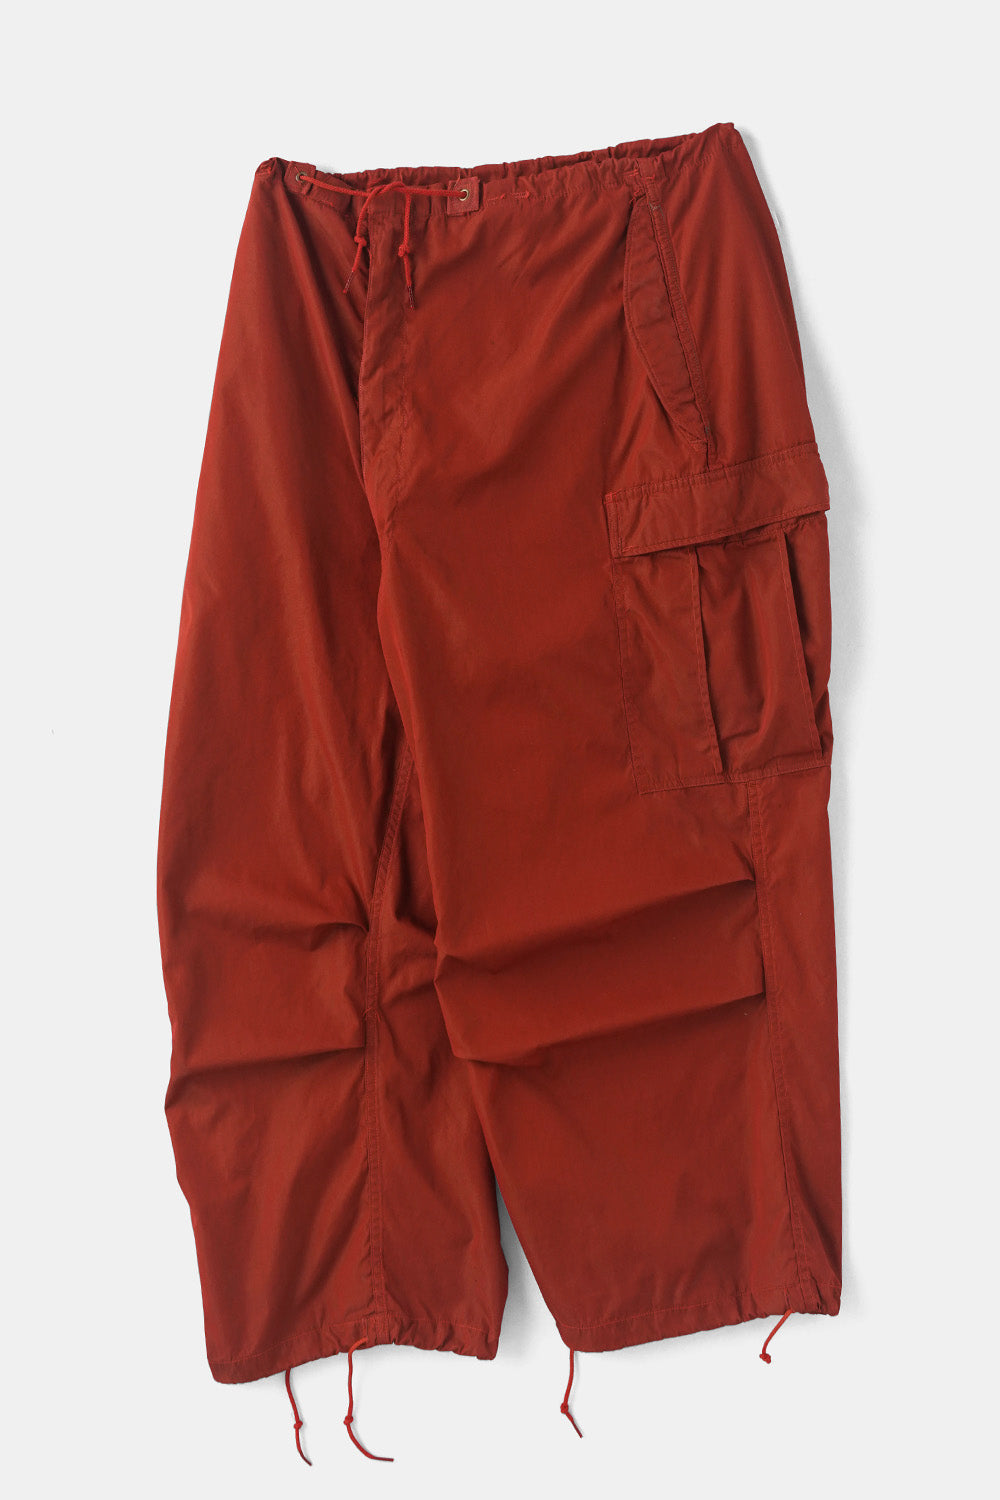 M-51 Arctic Cargo Trousers – FIFTH GENERAL STORE